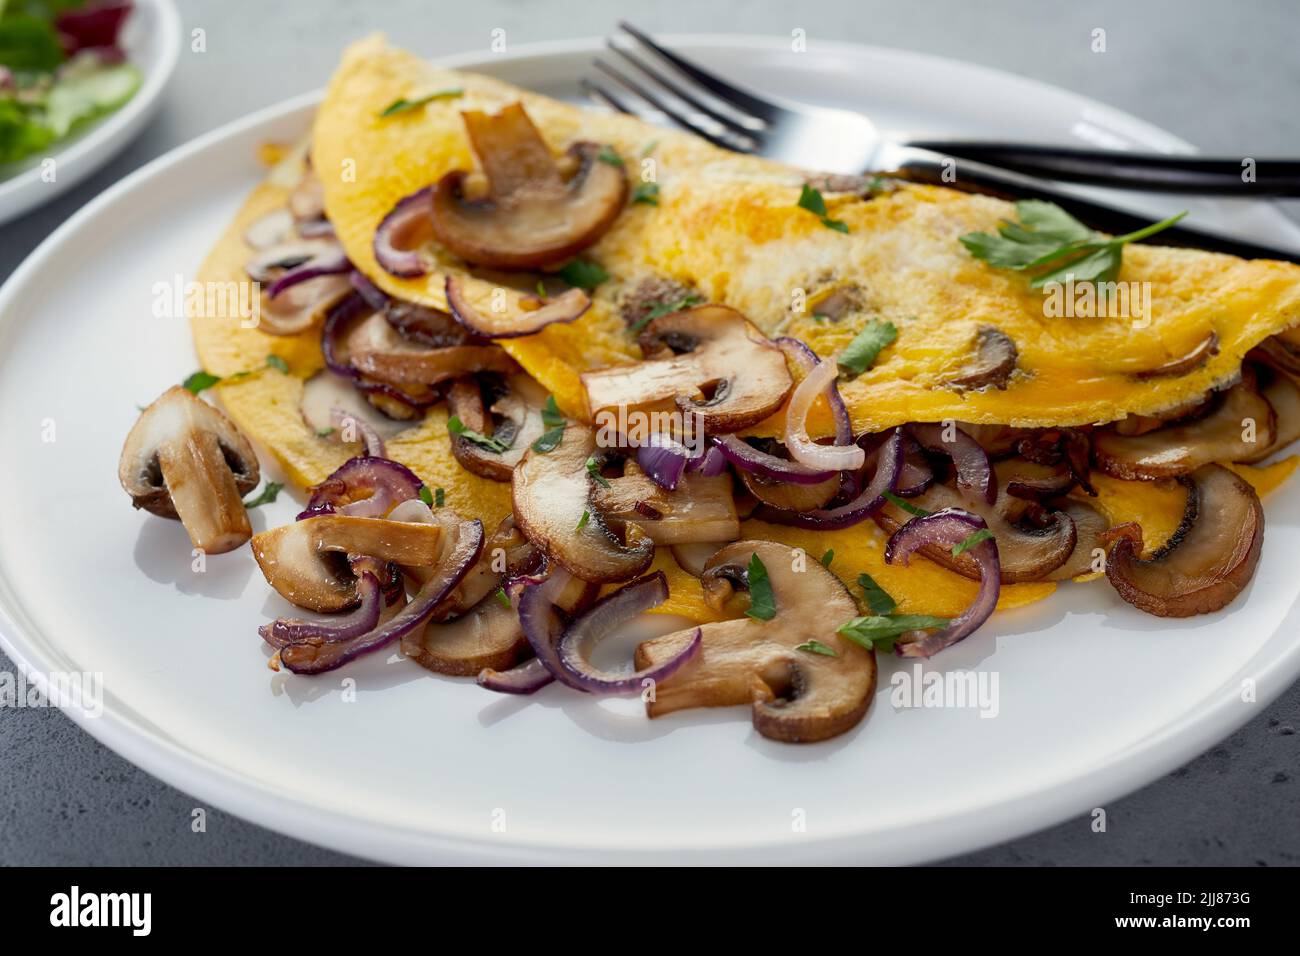 Palatable homemade omelet with champignons and onions served on plate on table for lunch Stock Photo